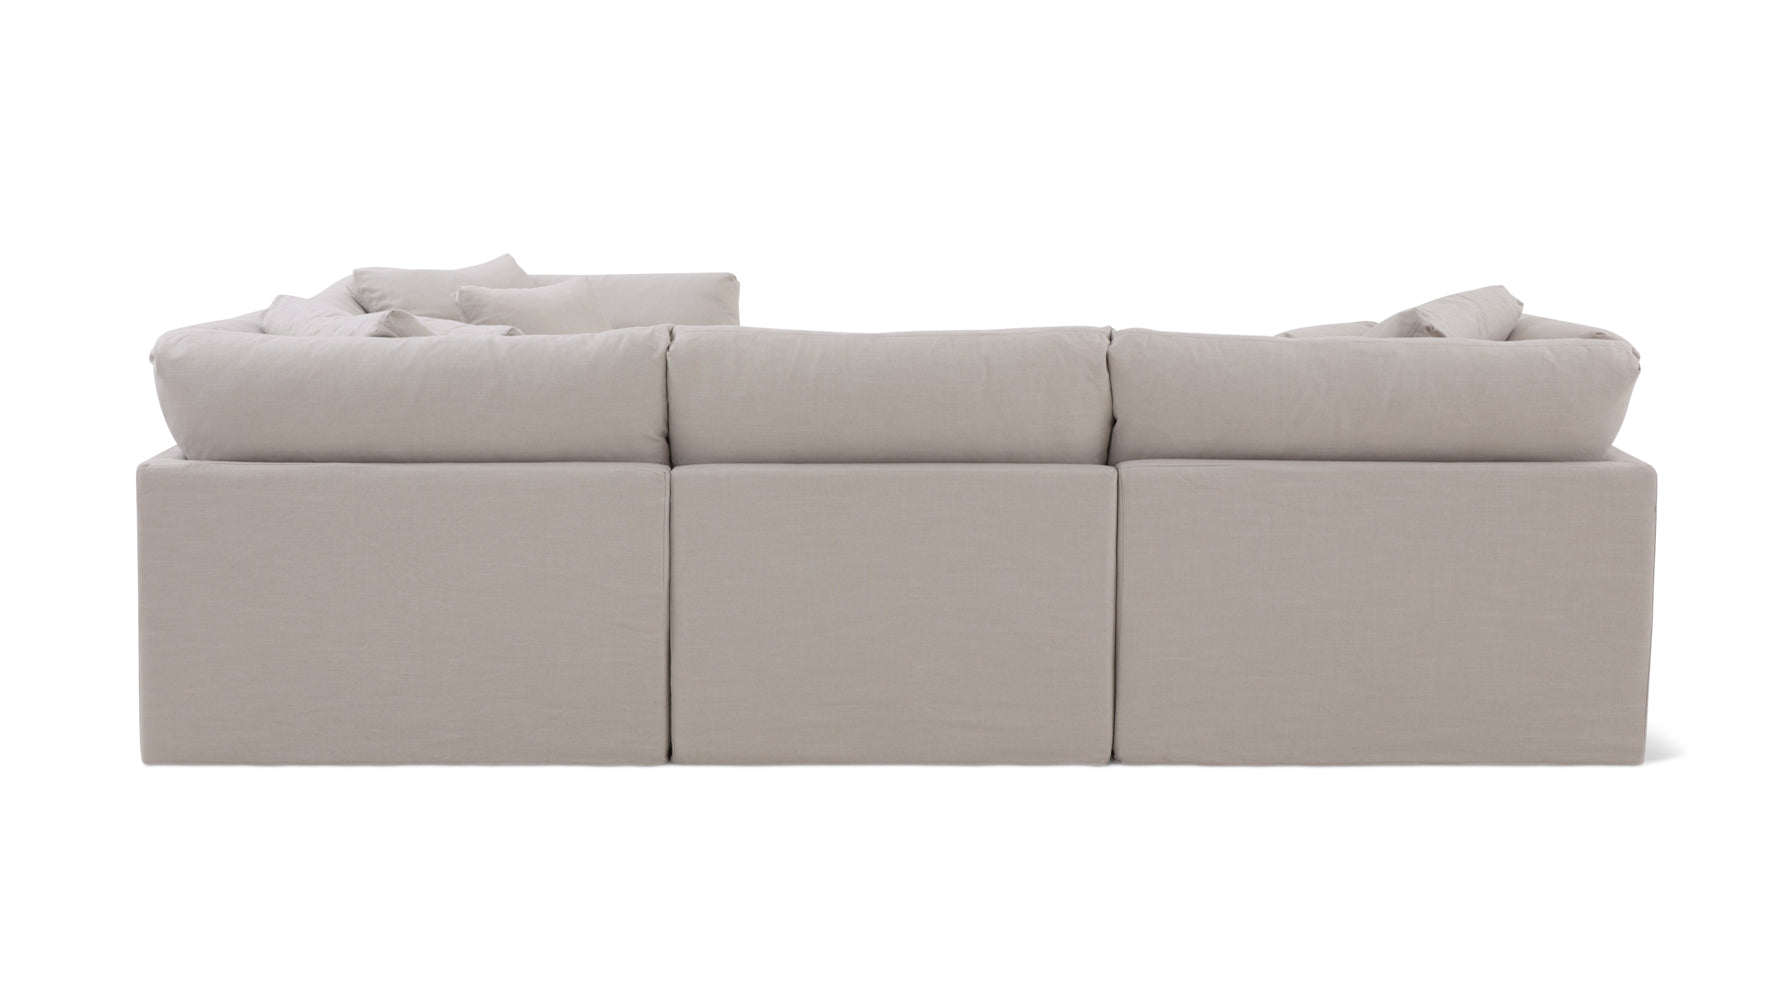 Get Together™ 4-Piece Modular Sectional Closed, Large, Clay - Image 6